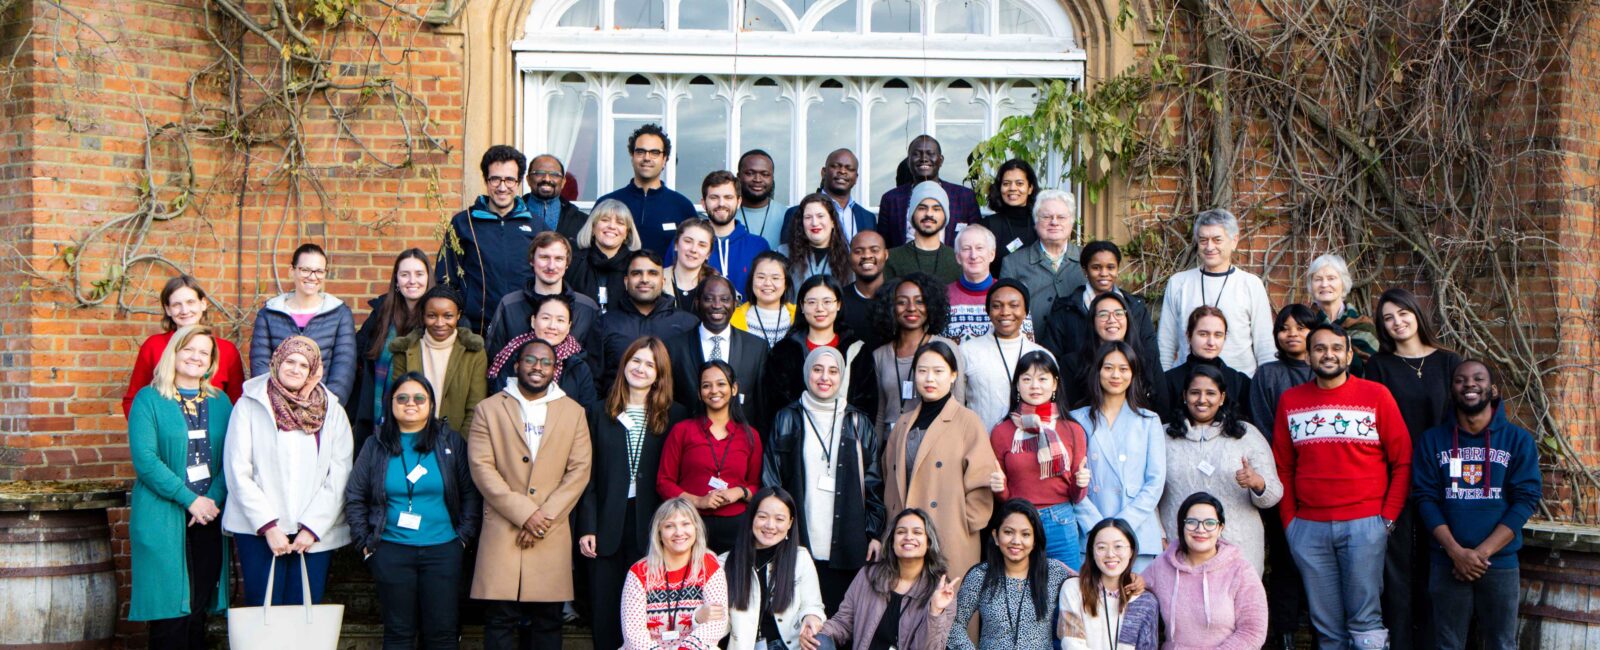 Group photo of the delegates attending the 2022 Commonwealth and International Students Christmas Conference